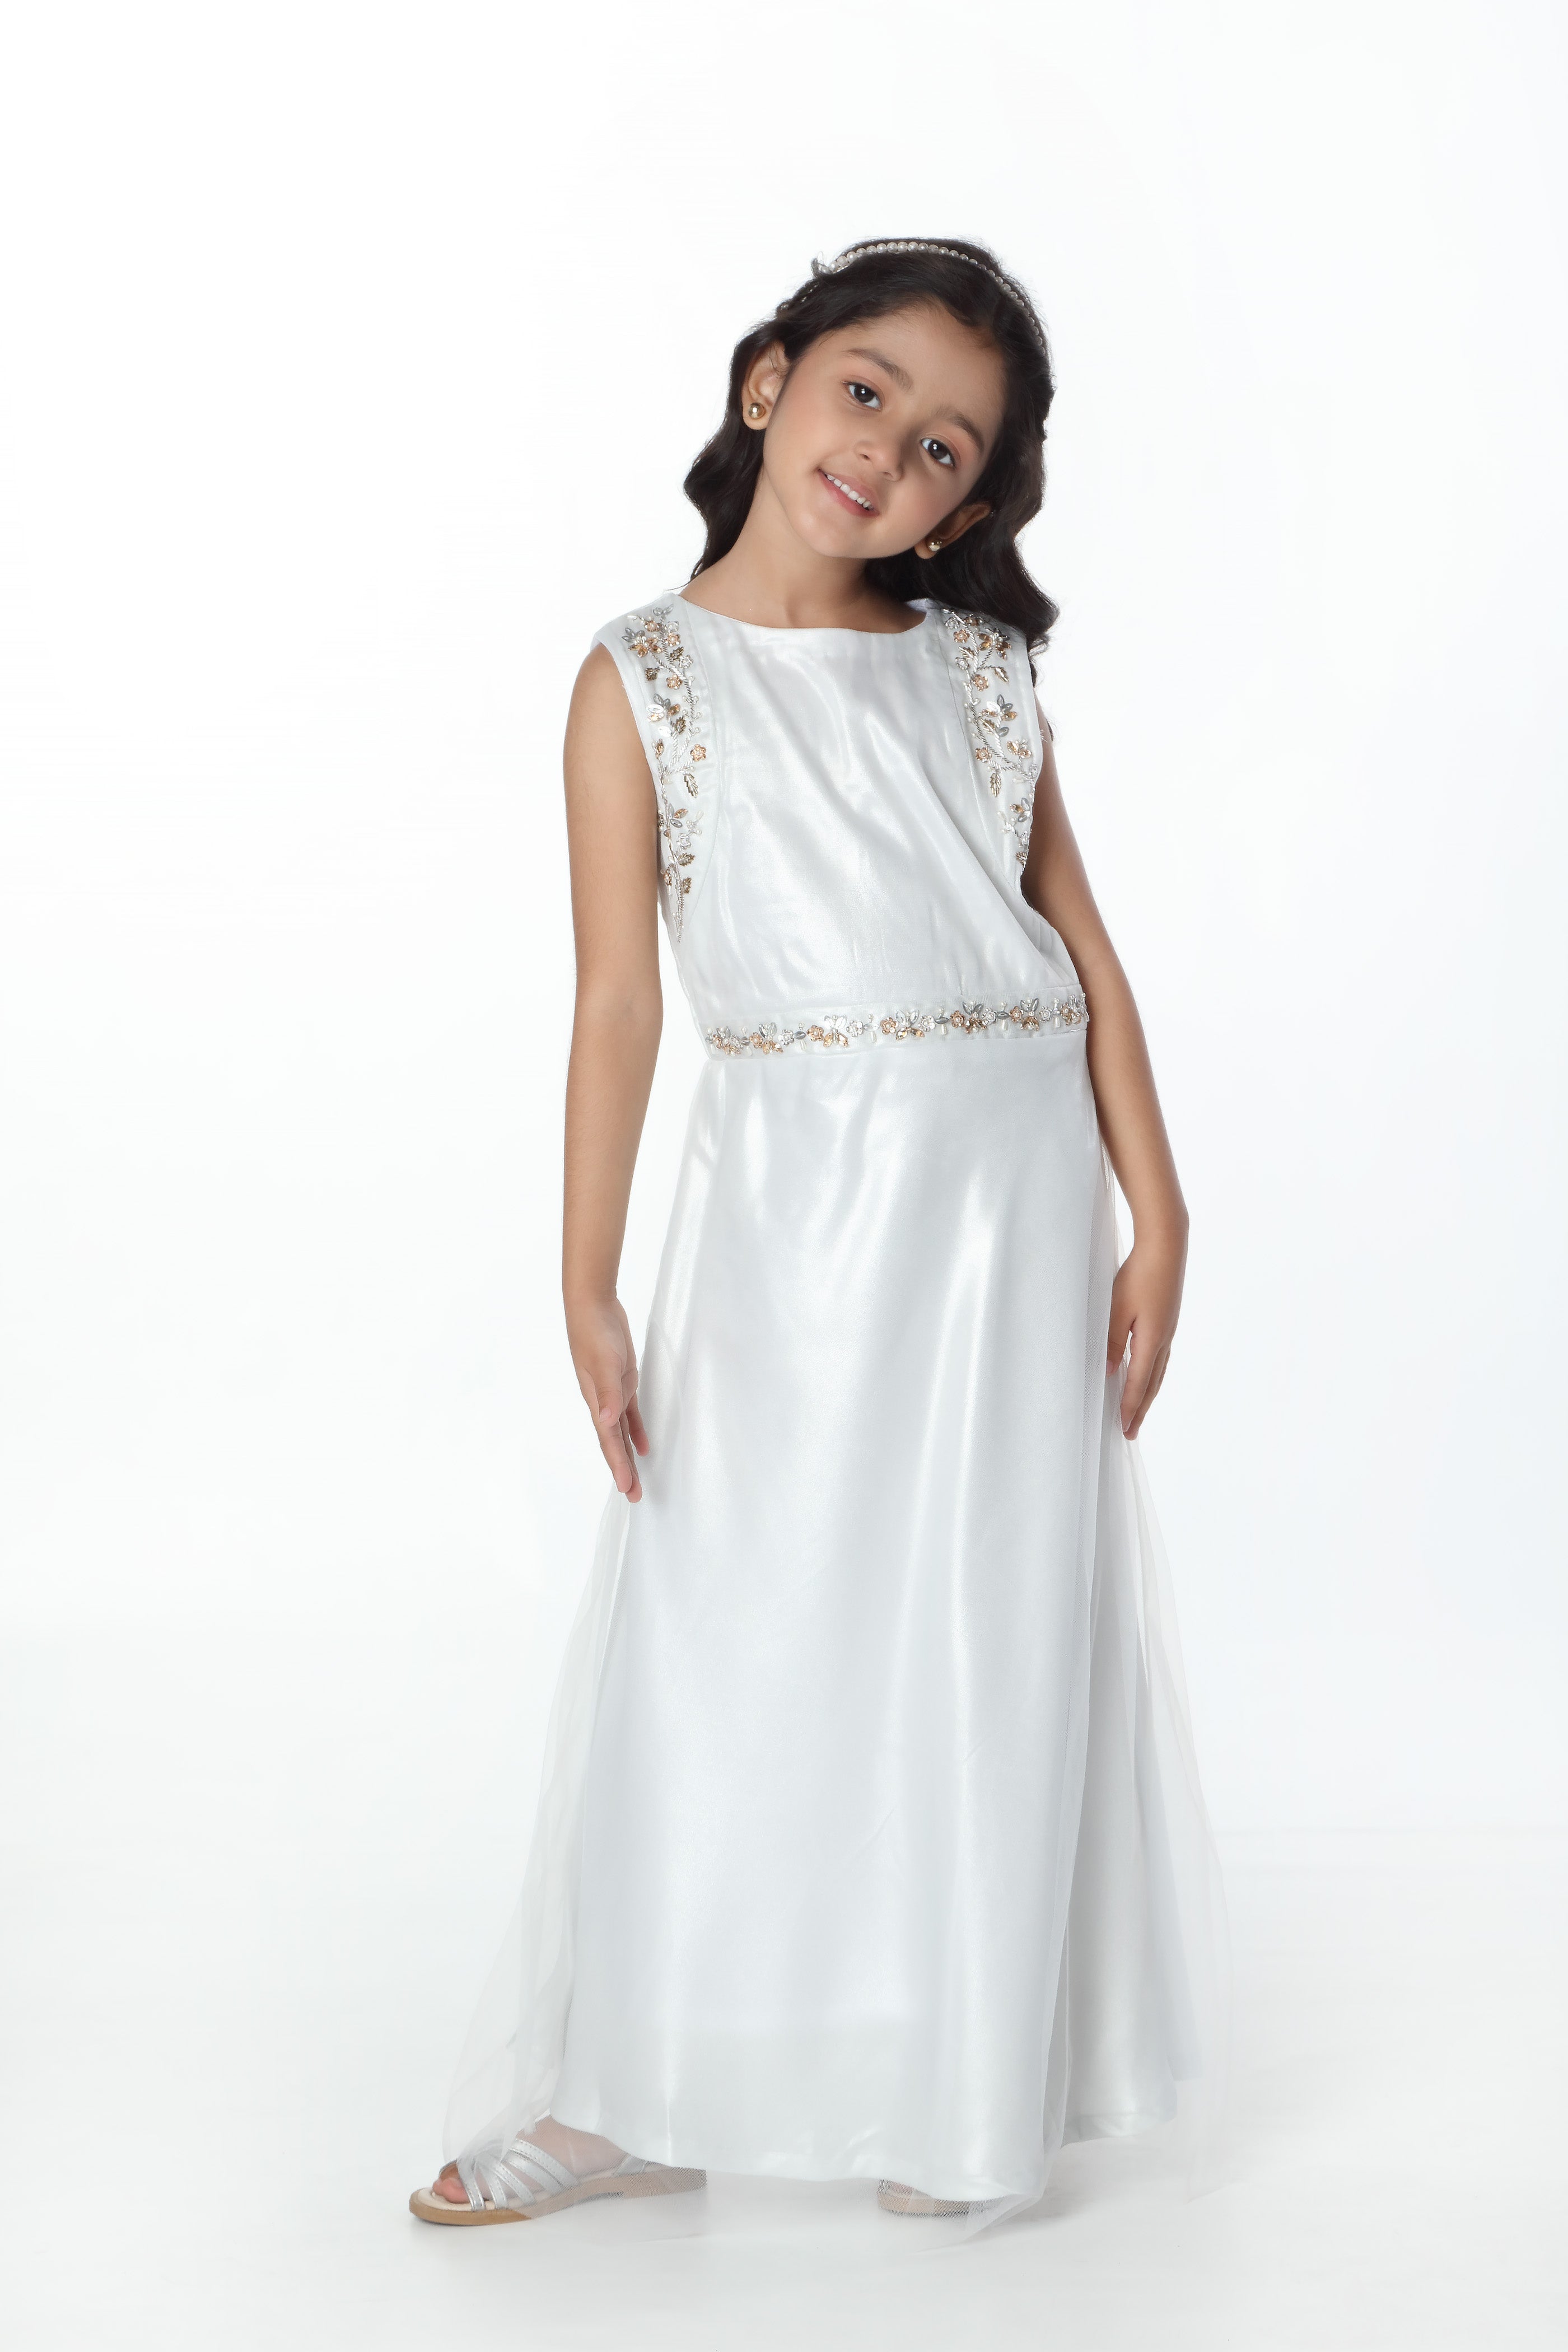 Embellished Gown (MMB-G105)